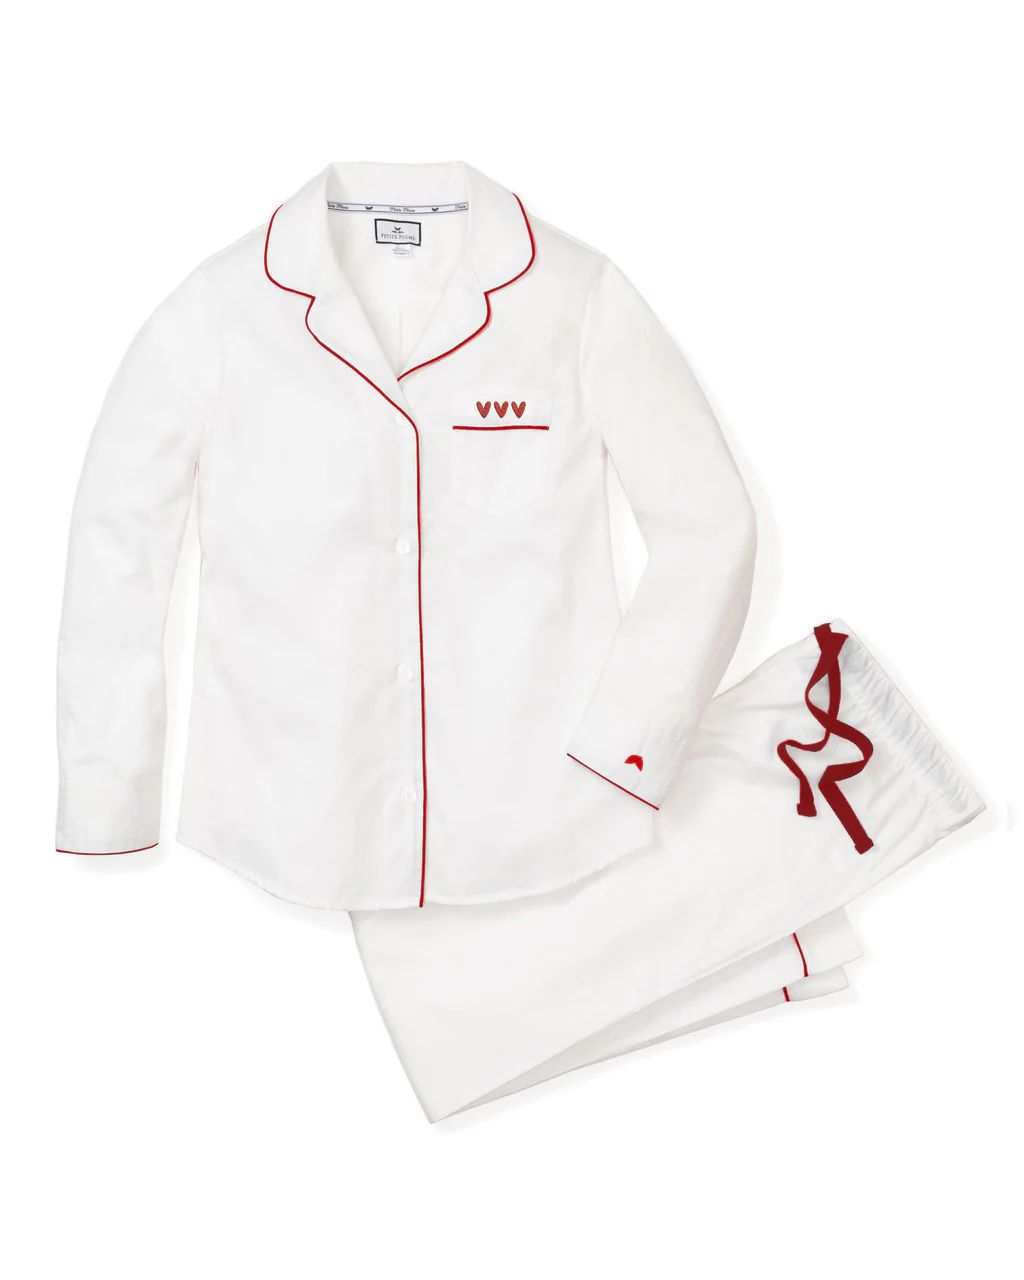 Valentine's Limited Edition - Women's White Pajama Sets with Heart Embroidery | Petite Plume